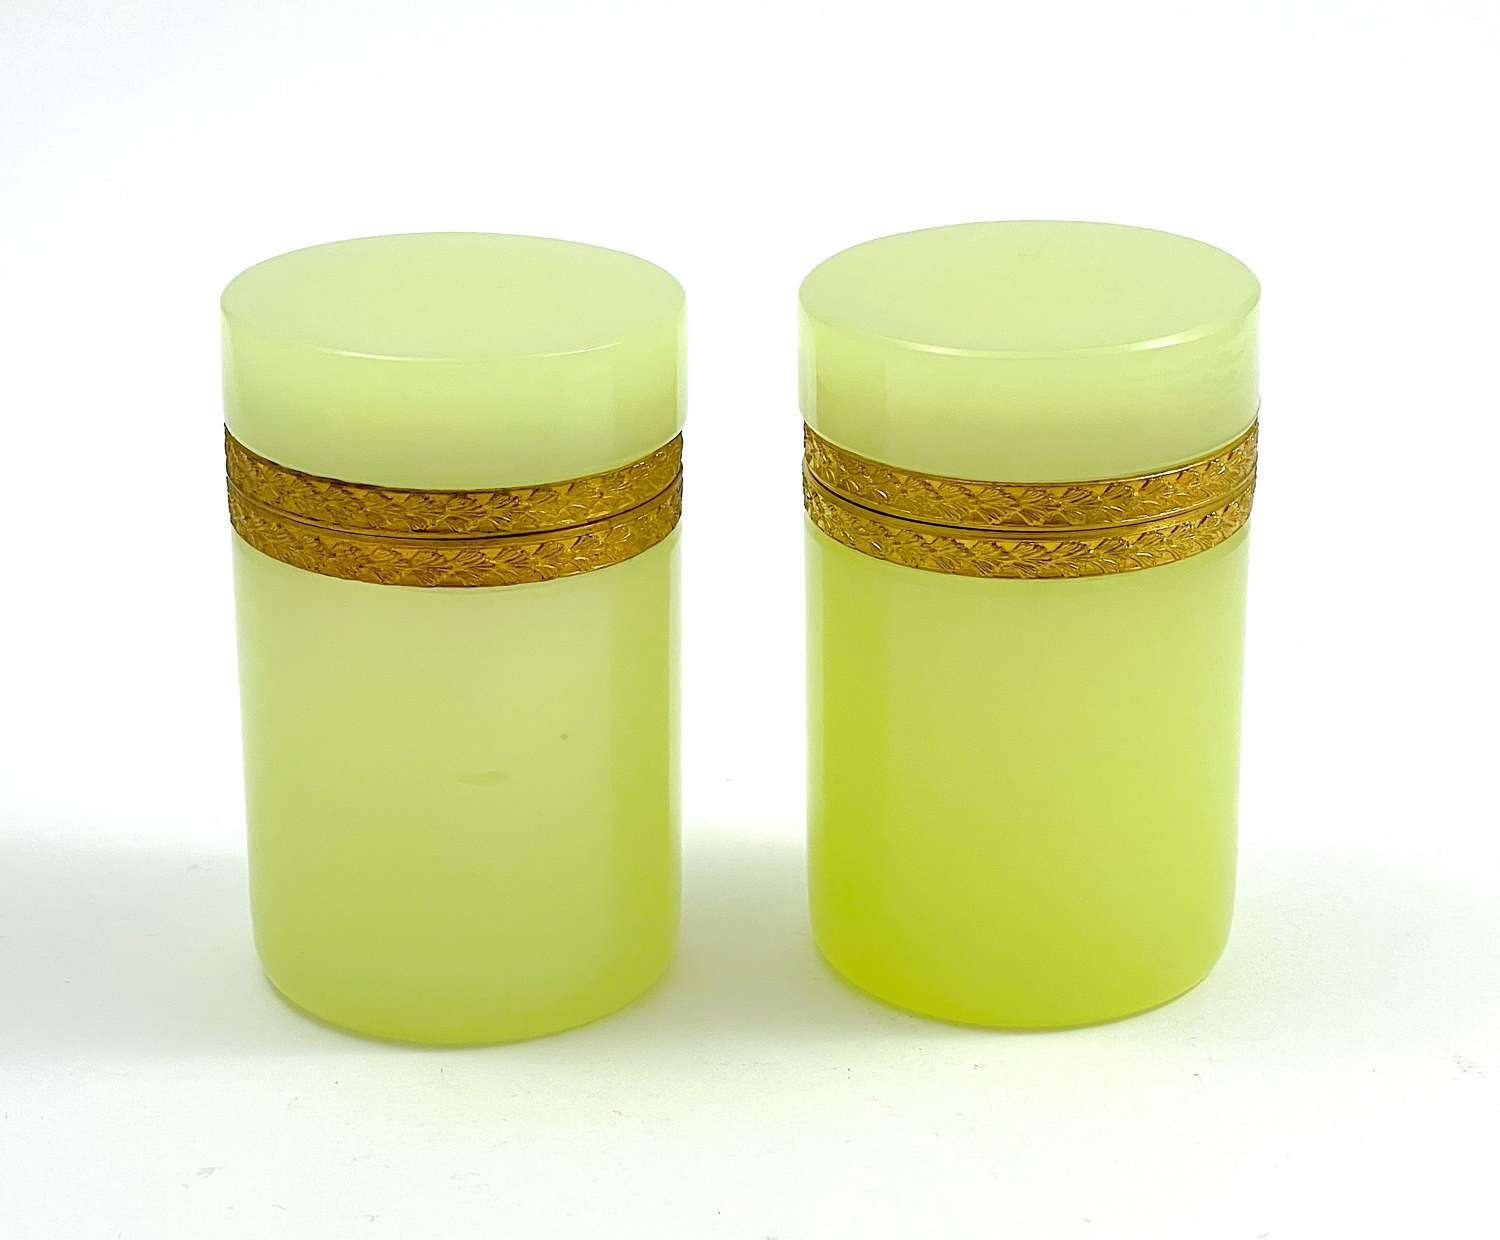 Pair of Antique Yellow Opaline Glass Cylindrical Caskets